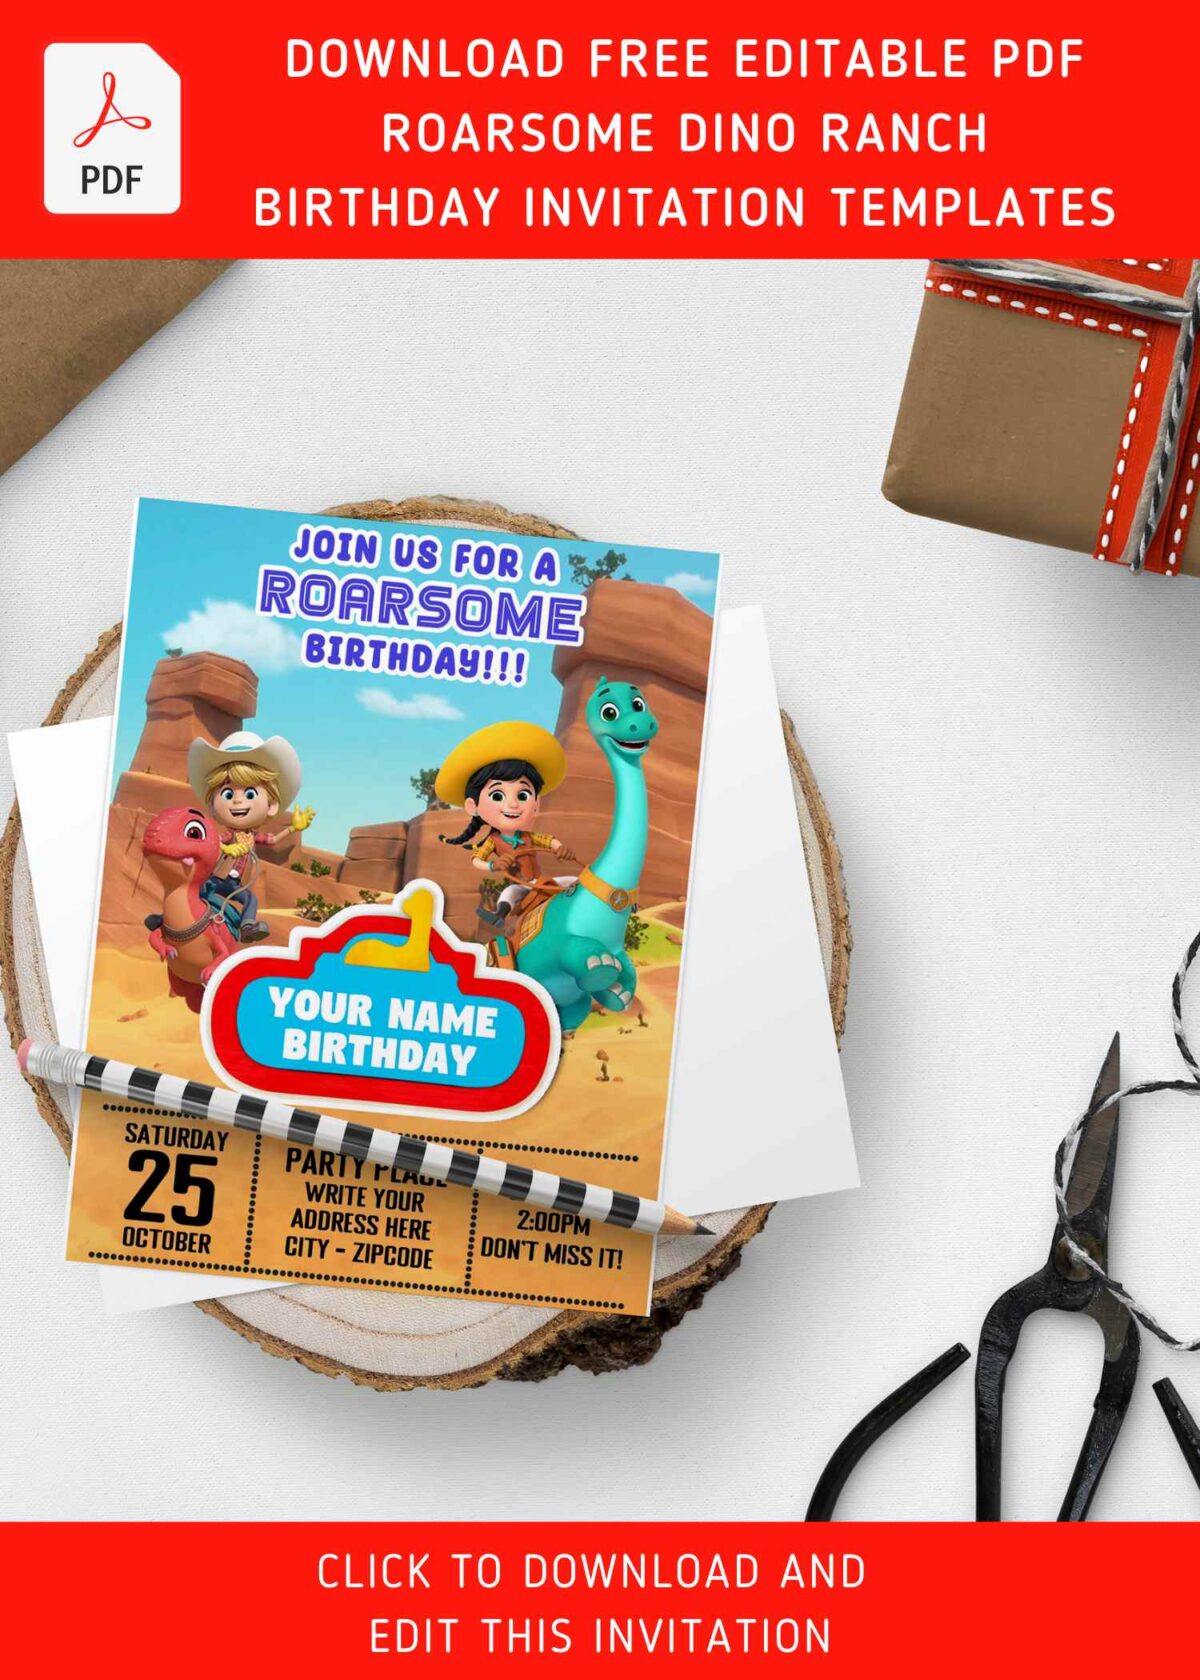 (Free Editable PDF) Meet The Rancher Dino Ranch Themed Birthday Invitation Templates with cute 